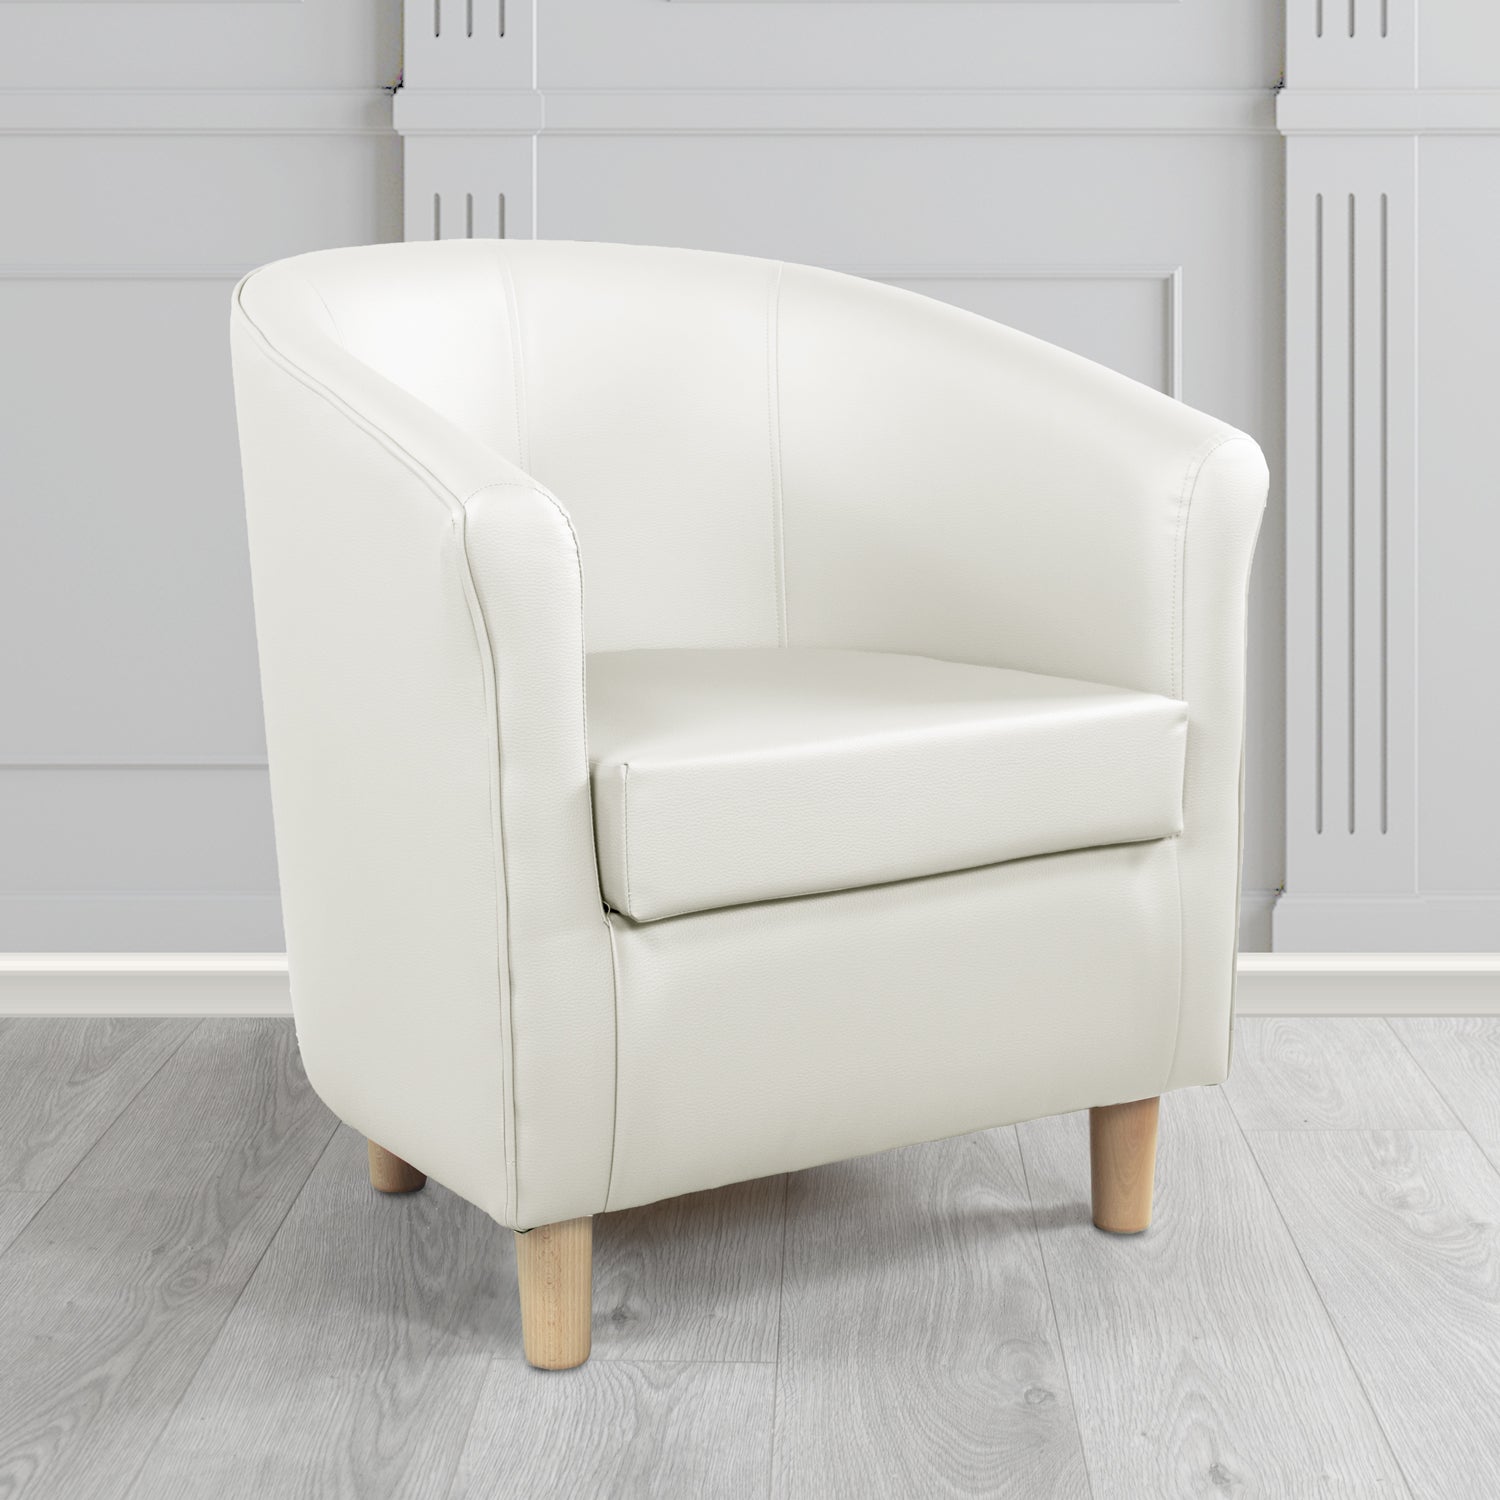 Tuscany Memphis Oyster MEM113 Antimicrobial Crib 5 Contract Faux Leather Tub Chair - The Tub Chair Shop